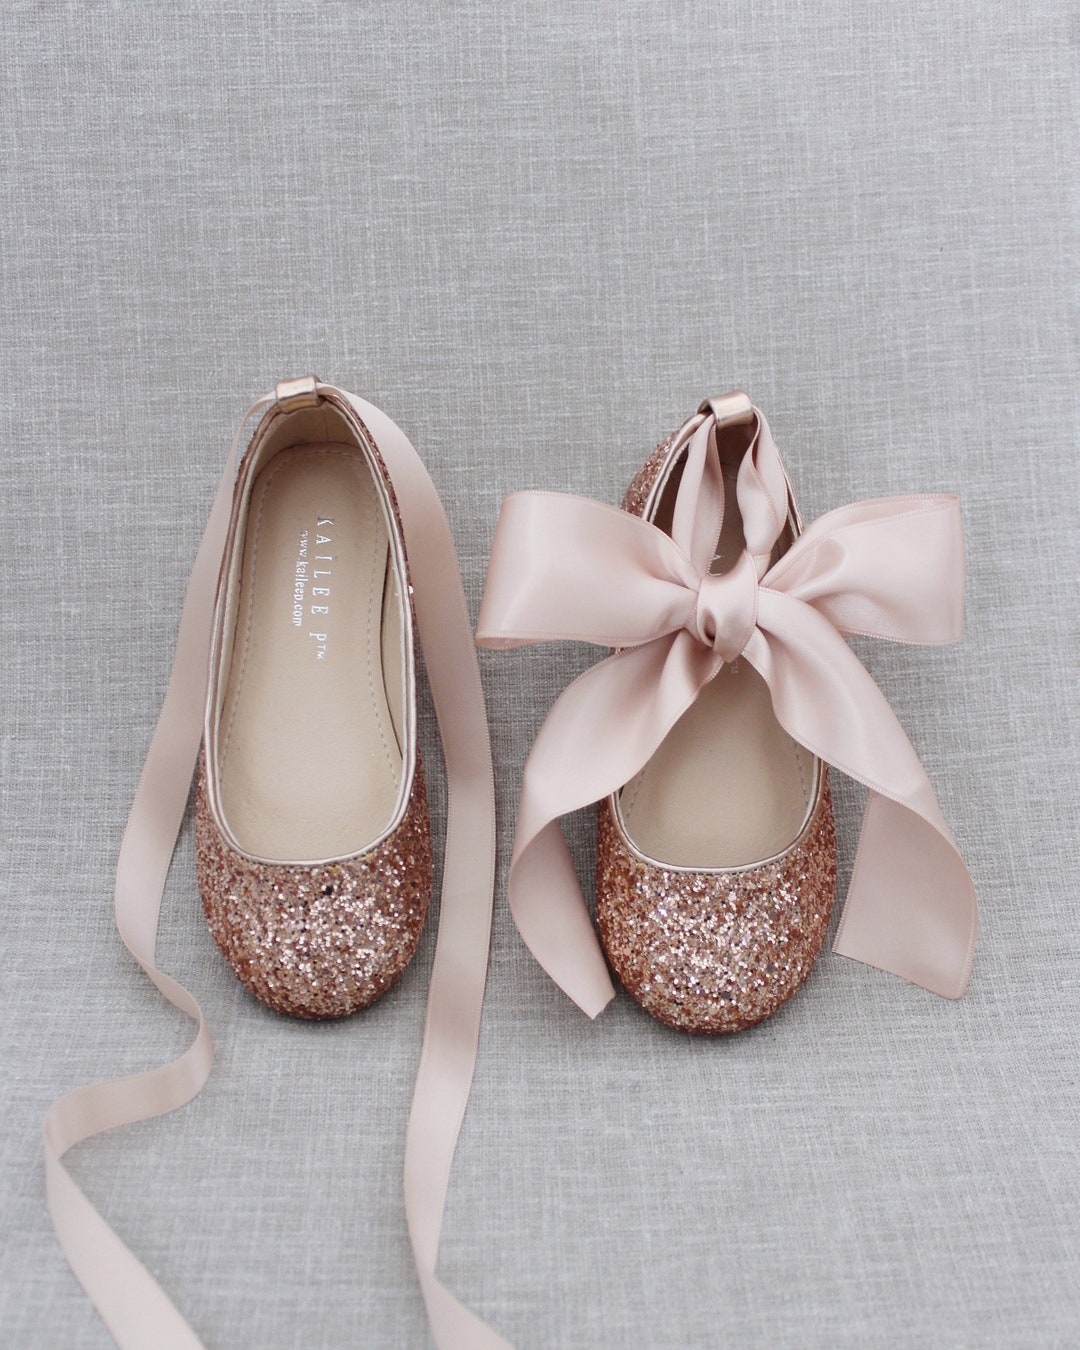 Rose Gold Rock Glitter Ballet Flats With BLUSH Satin Ankle Tie or ...